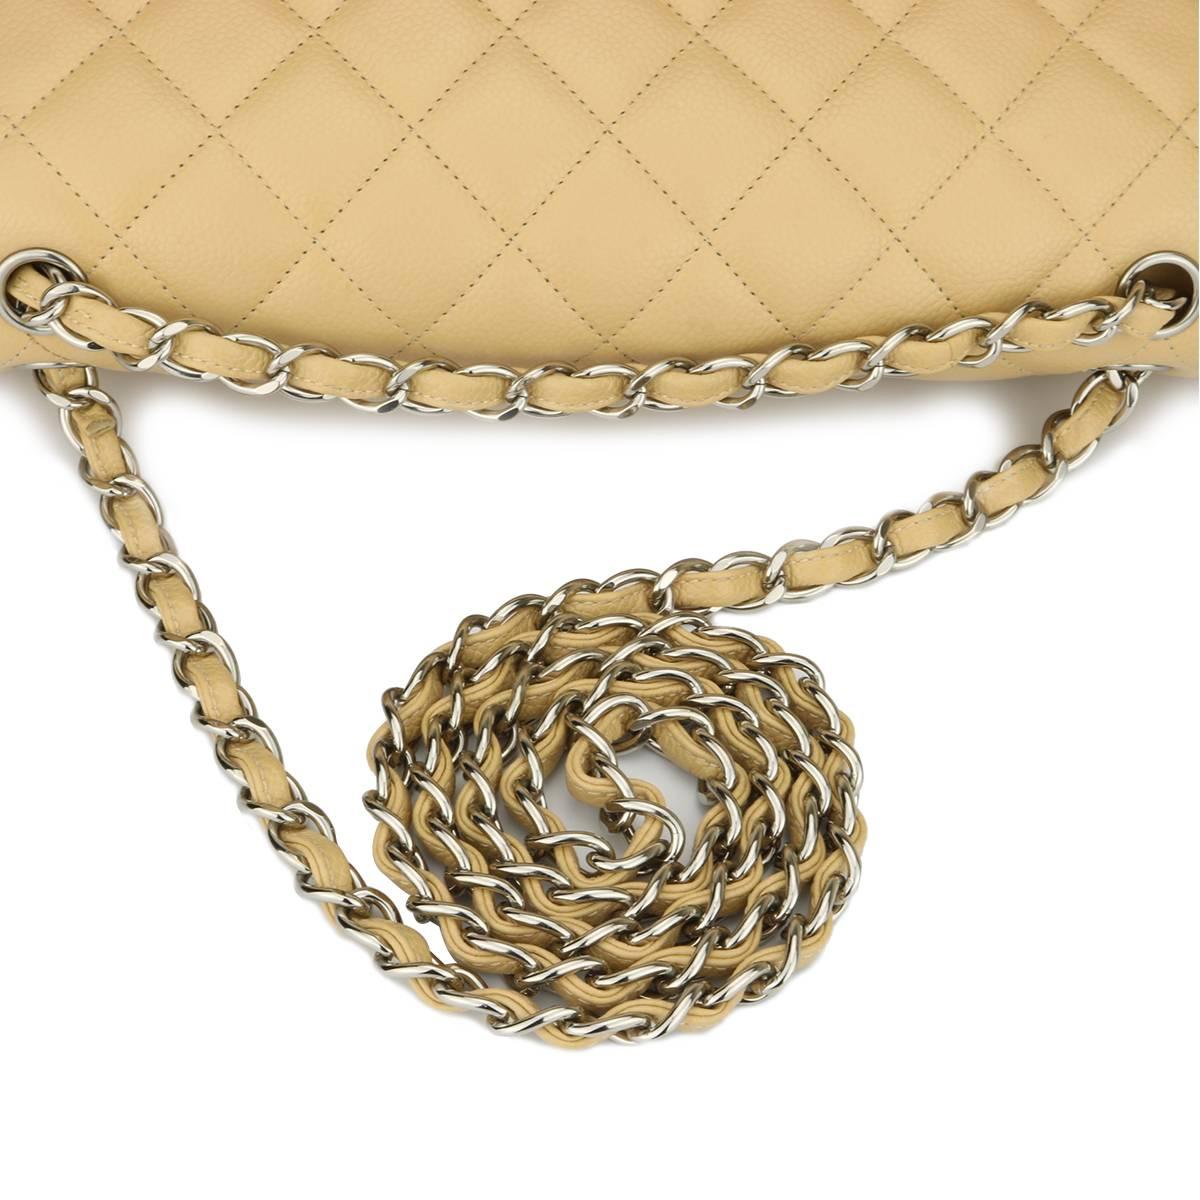 CHANEL Classic Double Flap Jumbo Beige Clair Caviar with Silver Hardware 2013 6